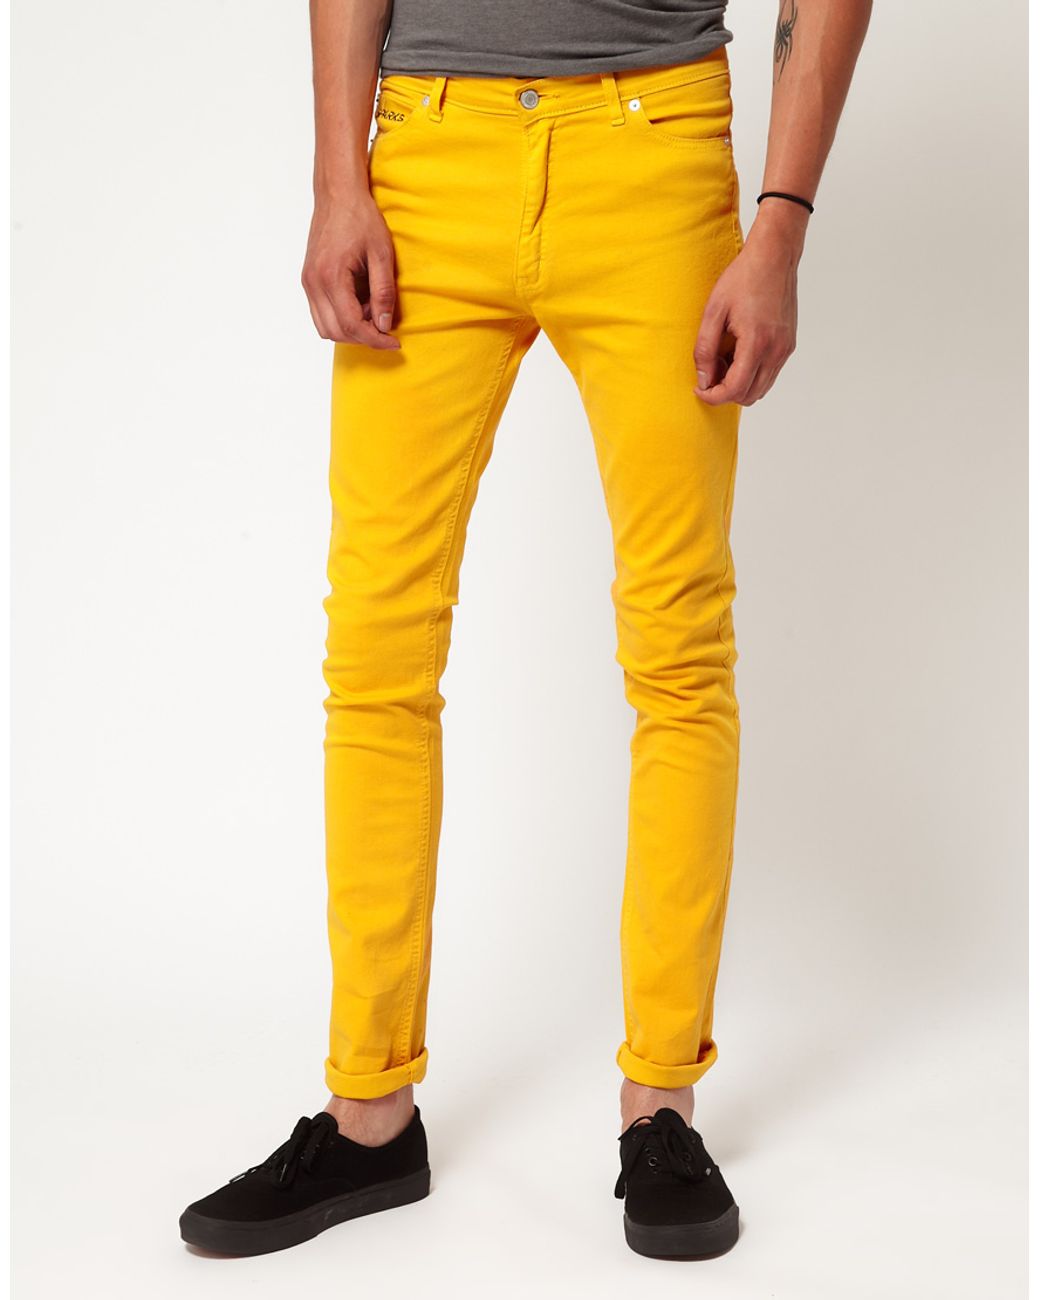 Sparks Blitz Skinny Jeans in Yellow for Men | Lyst